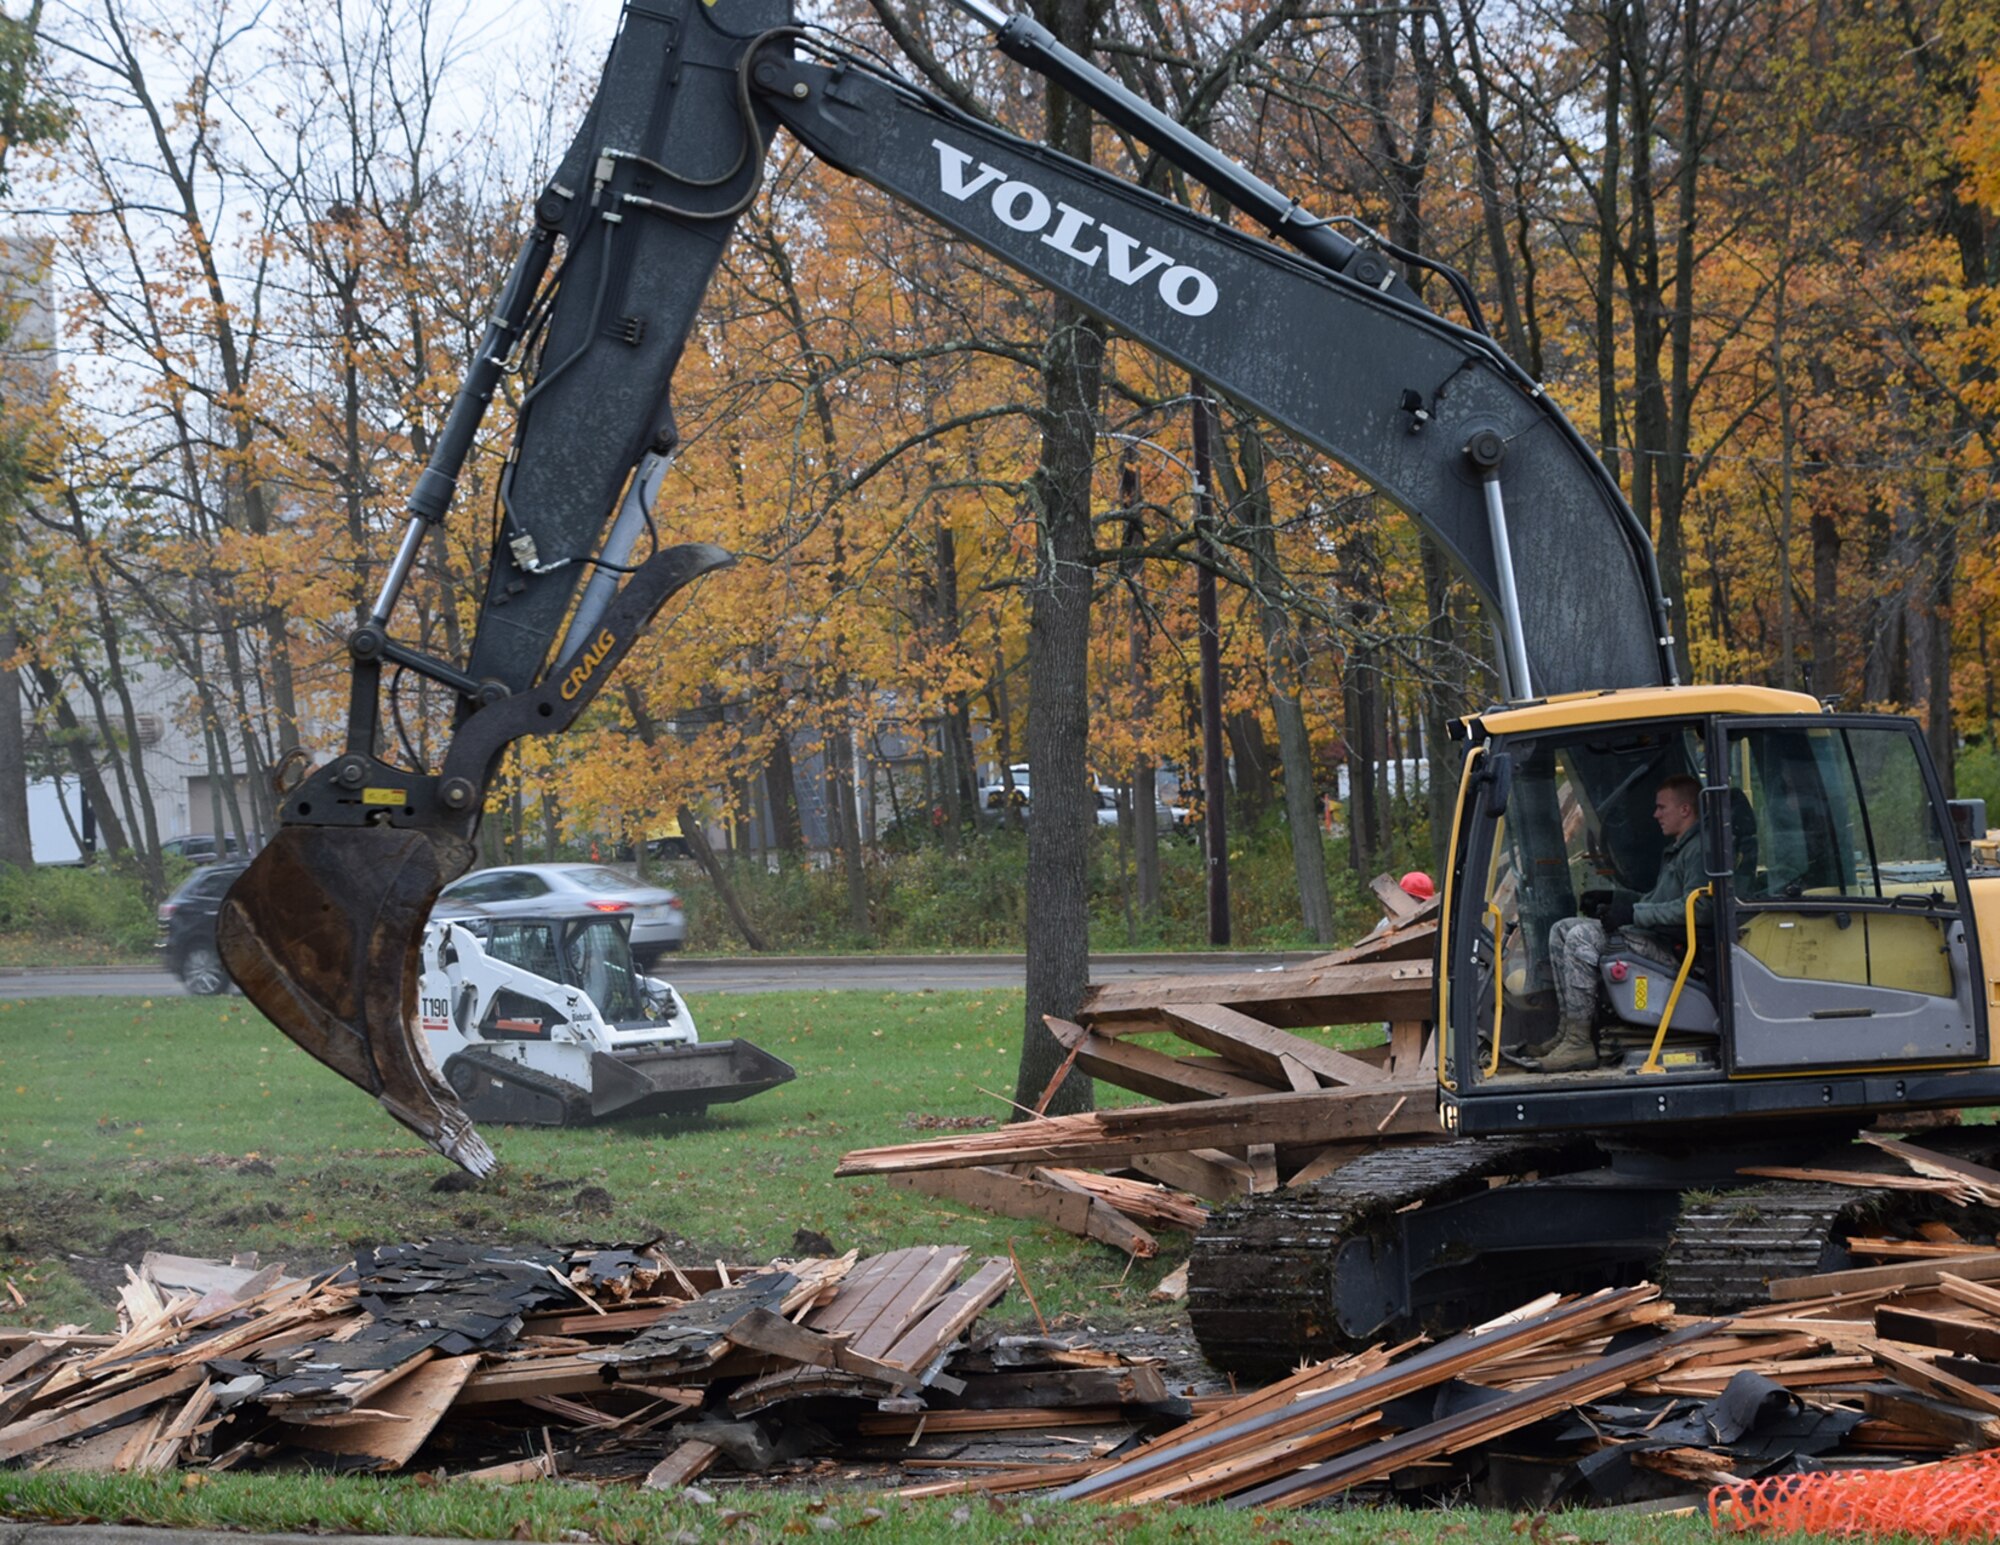 WRIGHT-PATTERSON AIR FORCE BASE, Ohio – Senior Airman Jarrod Harvey, 200th RED HORSE Detachment 1 heavy equipment operator, operates an excavator during the demolition of a condemned pavilion at the Air Force Institute of Technology Nov. 17, 2017. Ten RED HORSE Airmen participated in the demolition and are scheduled to return next spring to begin construction on a new pavilion. (U.S. Air Force photo/Katie Scott)